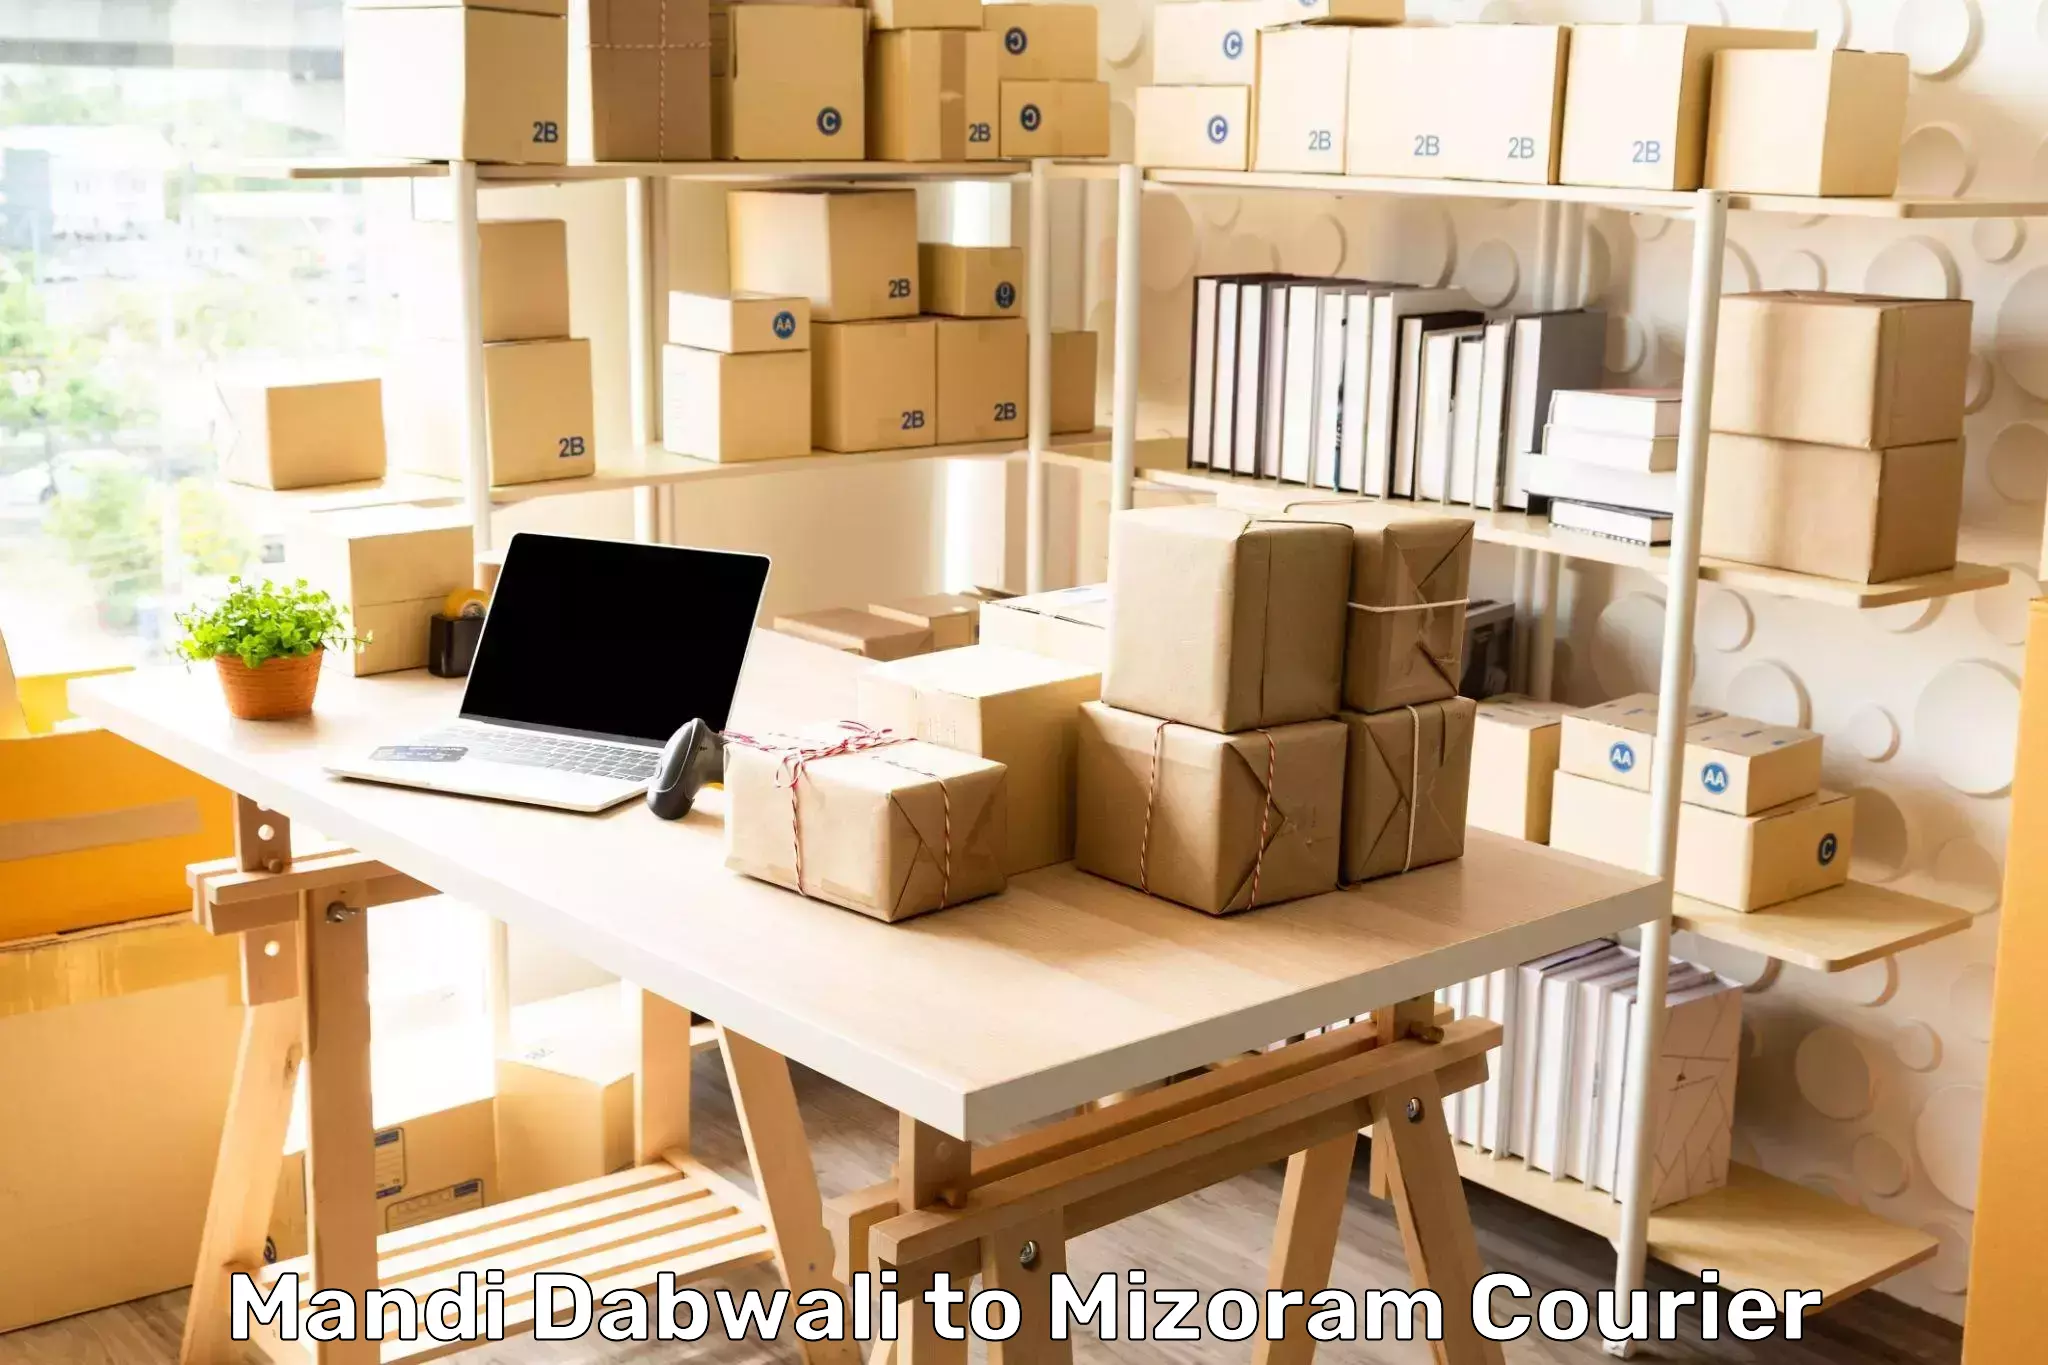 Wholesale parcel delivery in Mandi Dabwali to Mizoram